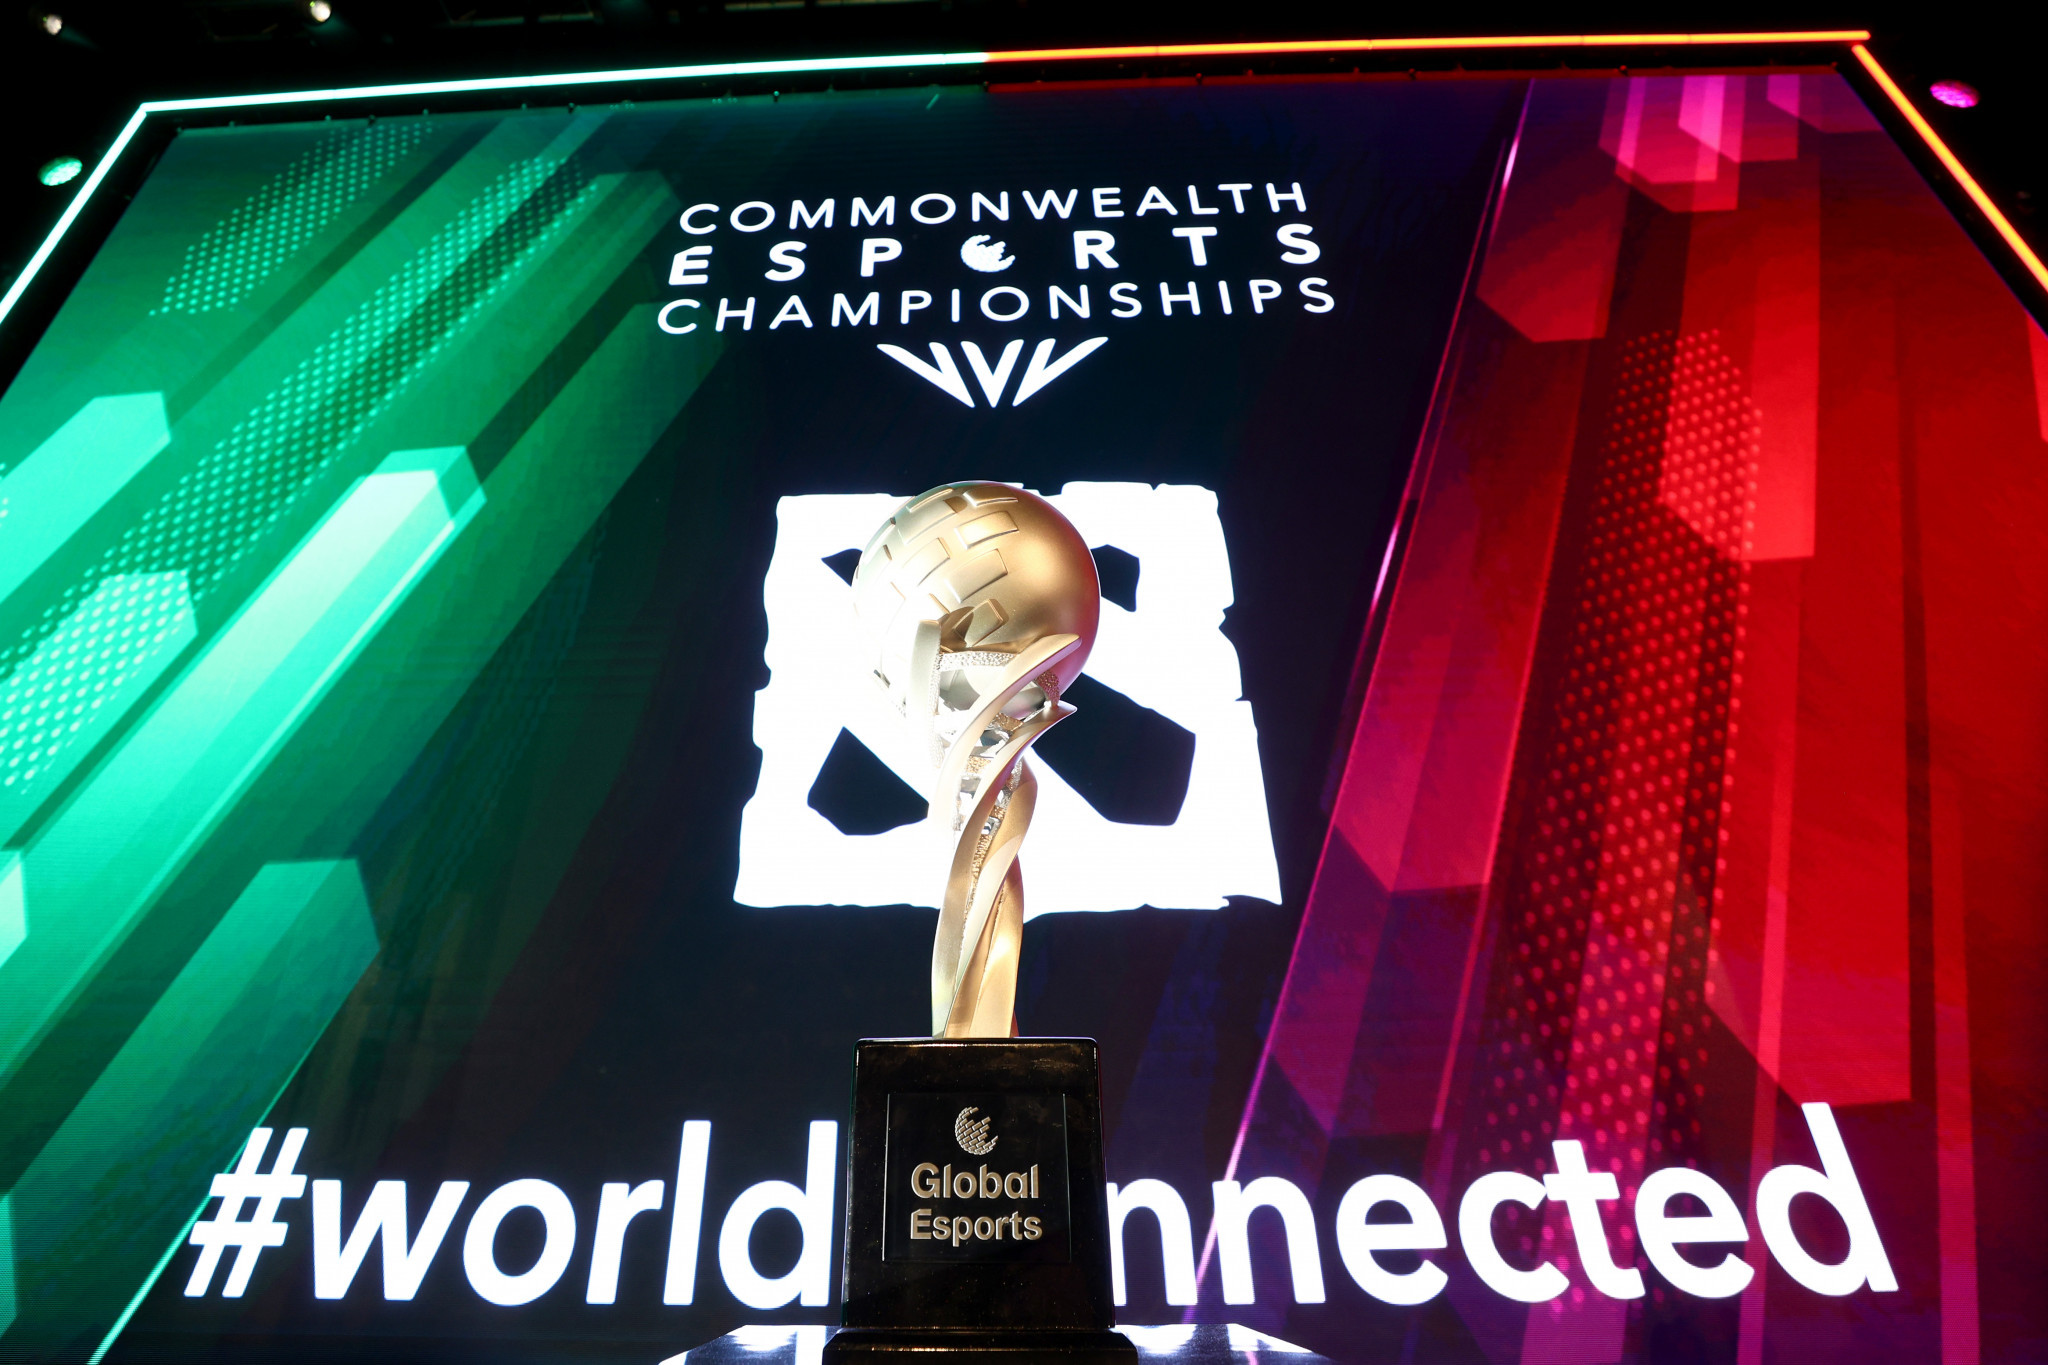 The Global Esports Federation has previously hinted it would like to host another edition of the Commonwealth Esports Championships ©Getty Images